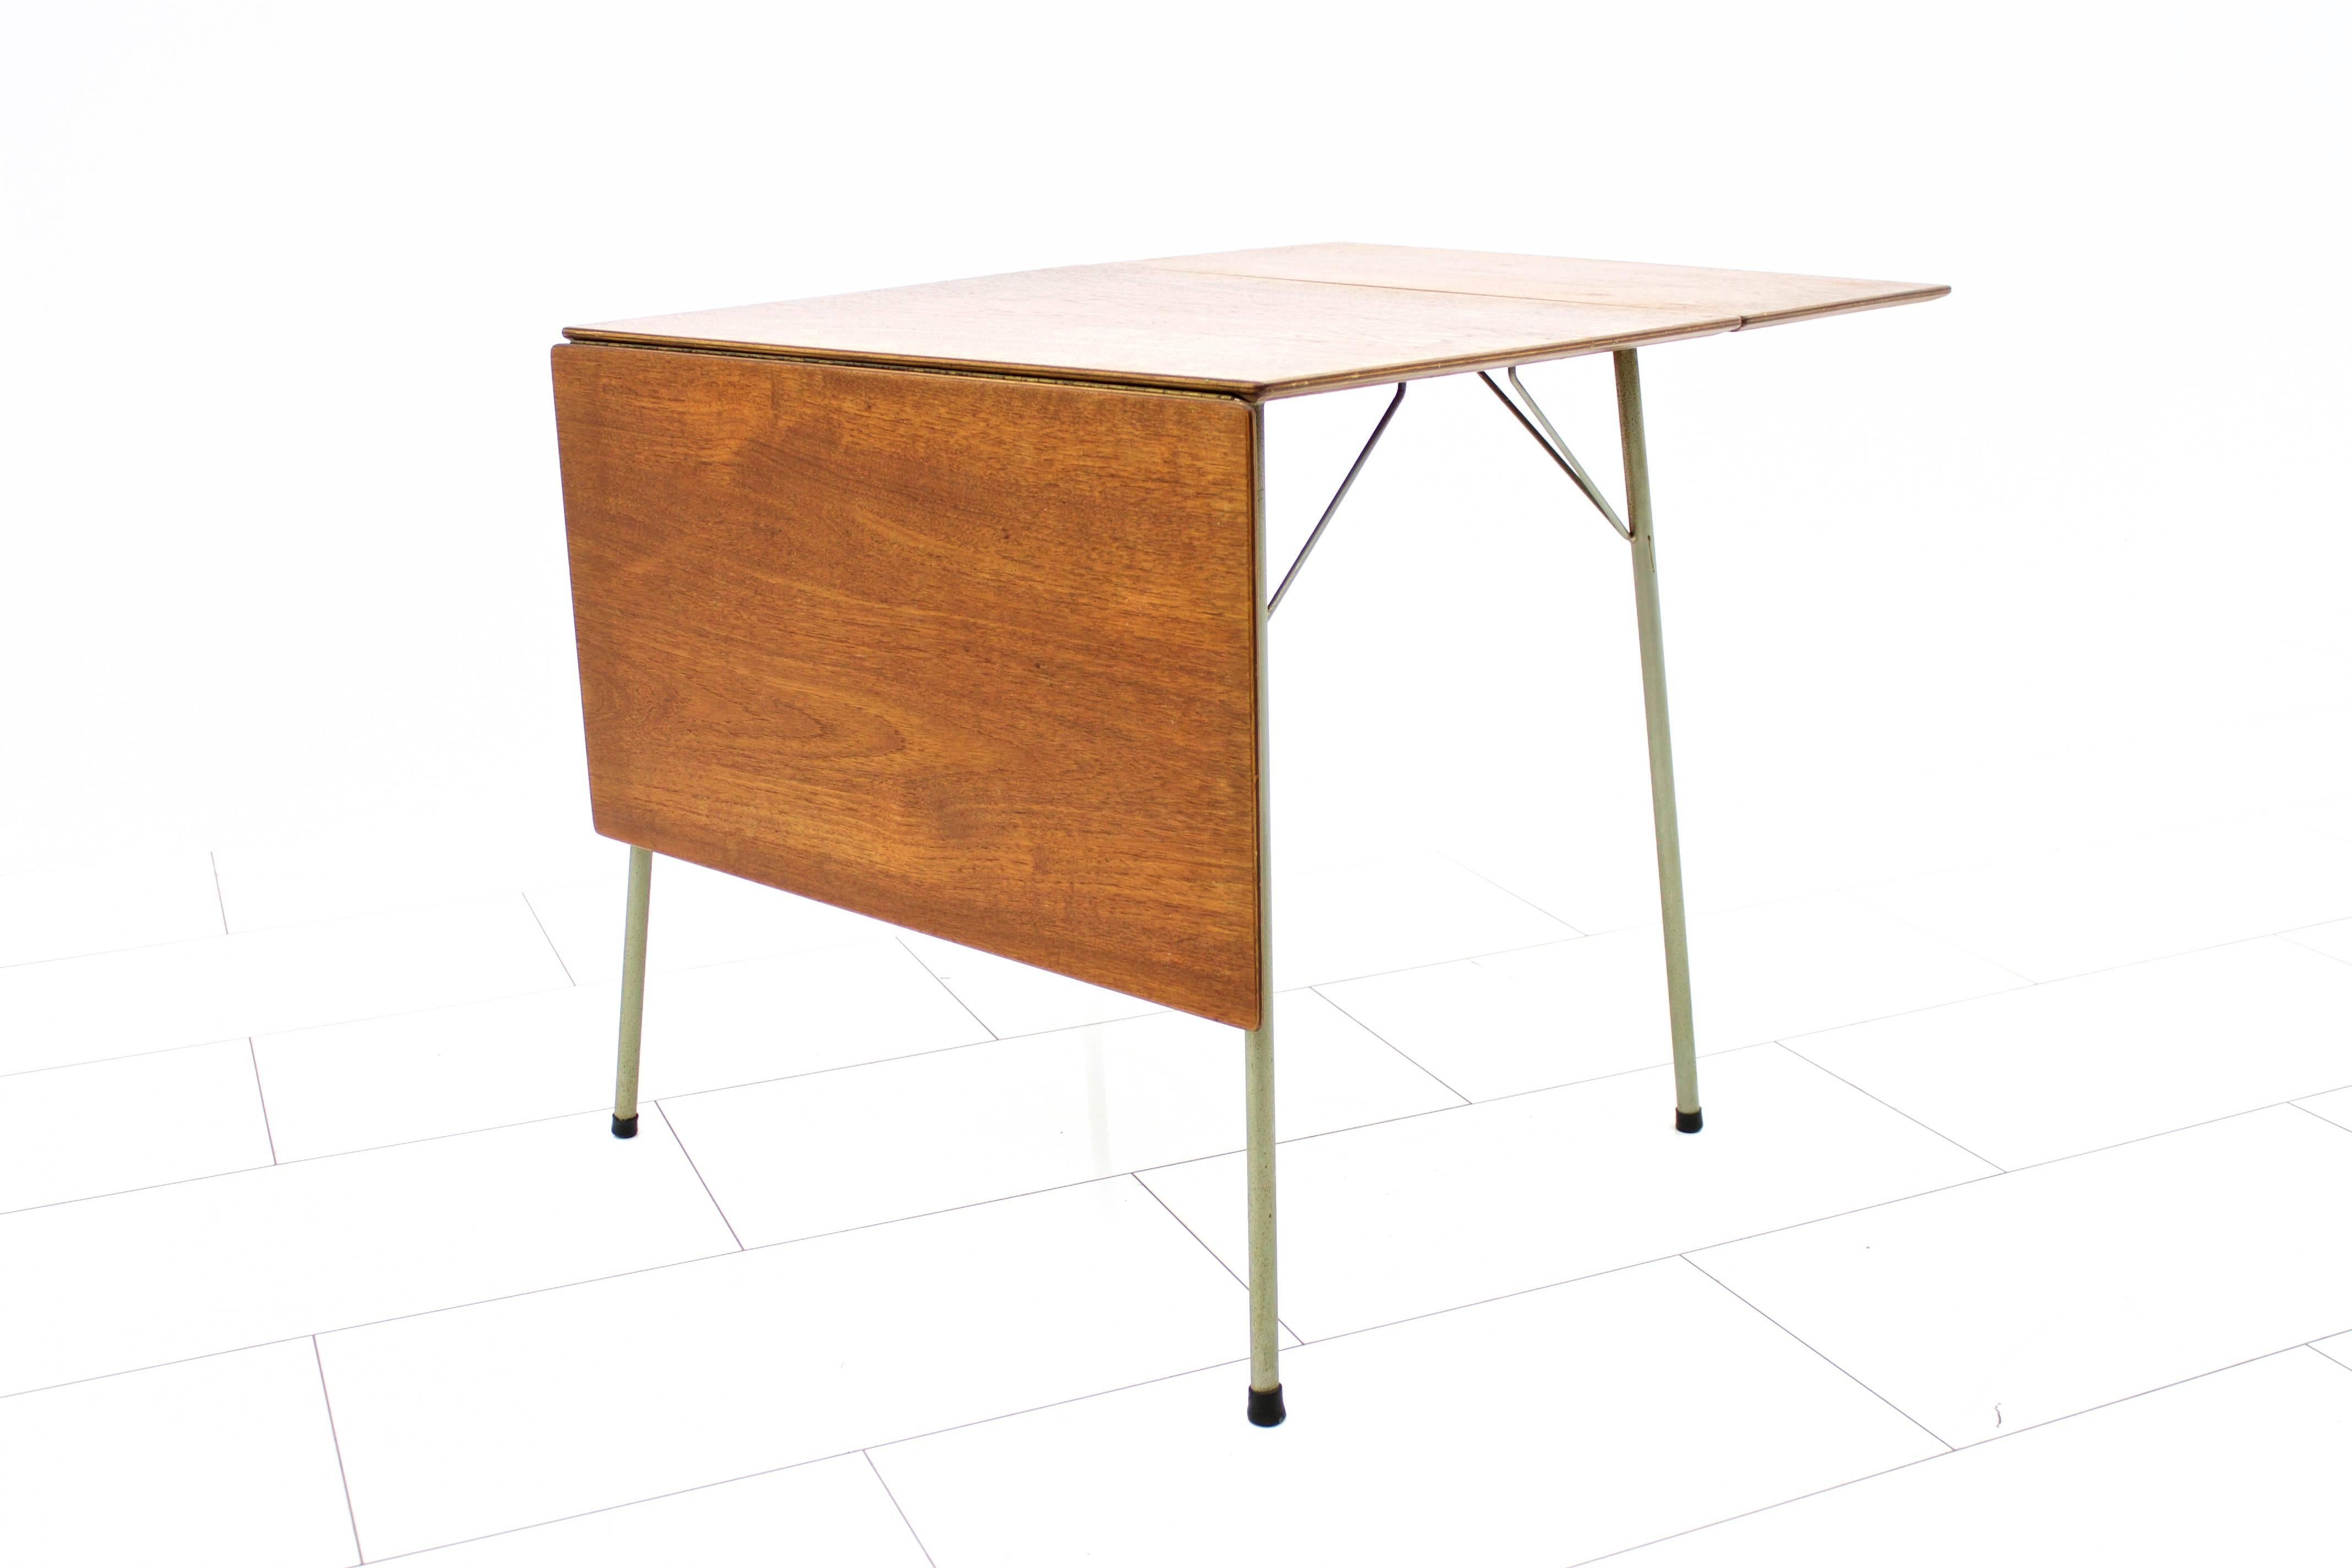 Early drop leaf dining table 3601 in teak wood by Arne Jacobsen and made by Fritz Hansen. This table is from 1958.

Very good condition.

Worldwide shipping.